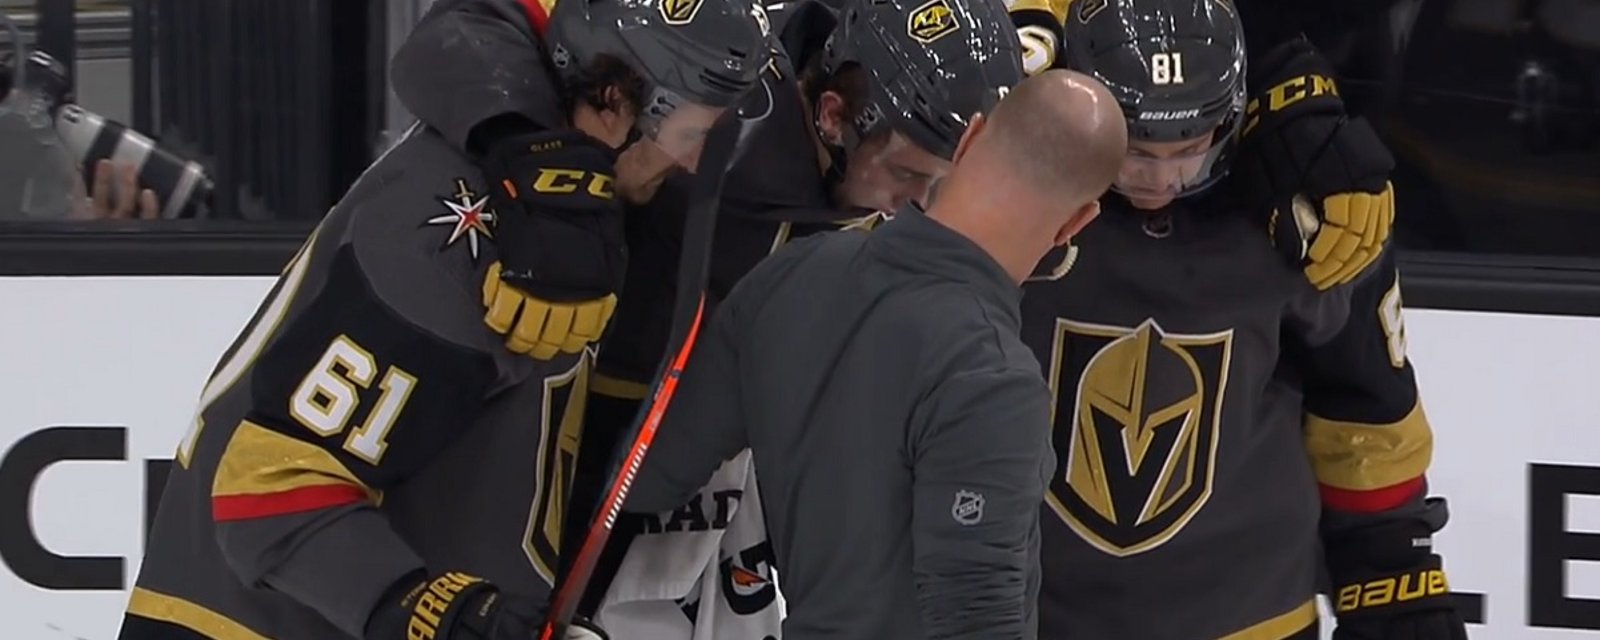 Cody Glass carried off the ice after taking a spinning elbow to the back of the head.